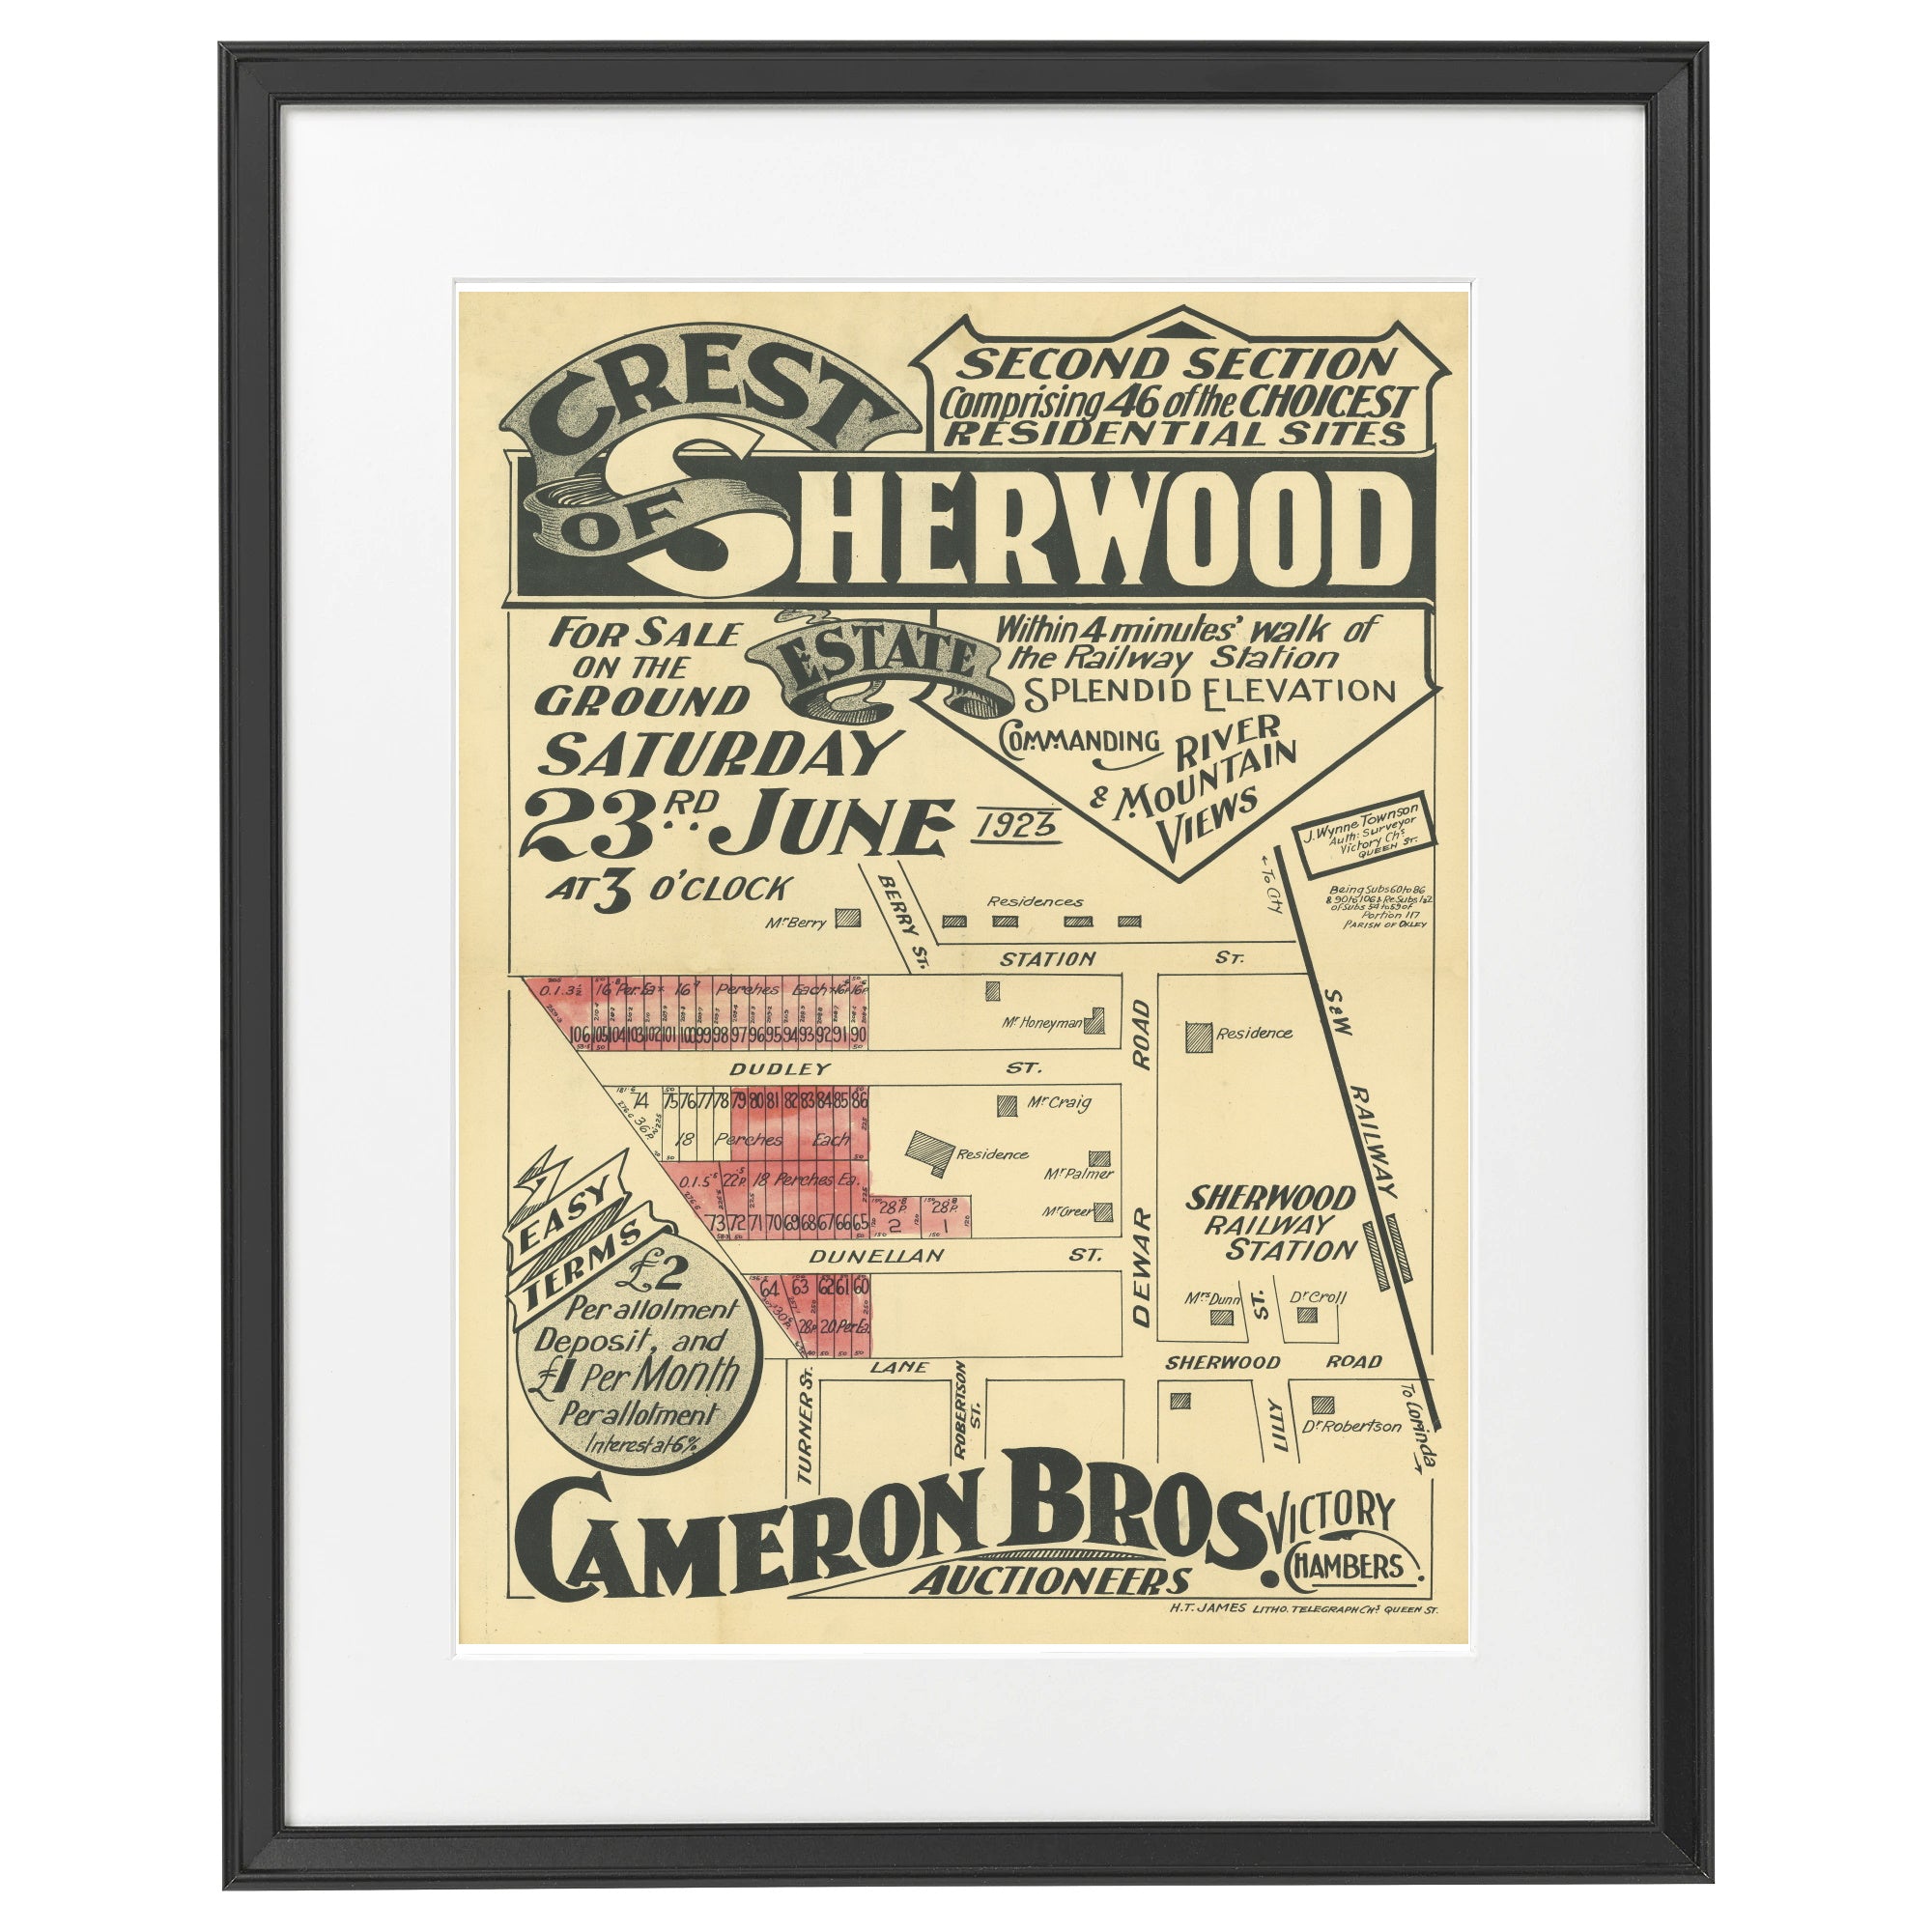 1923 Crest of Sherwood Estate - 98 years ago today